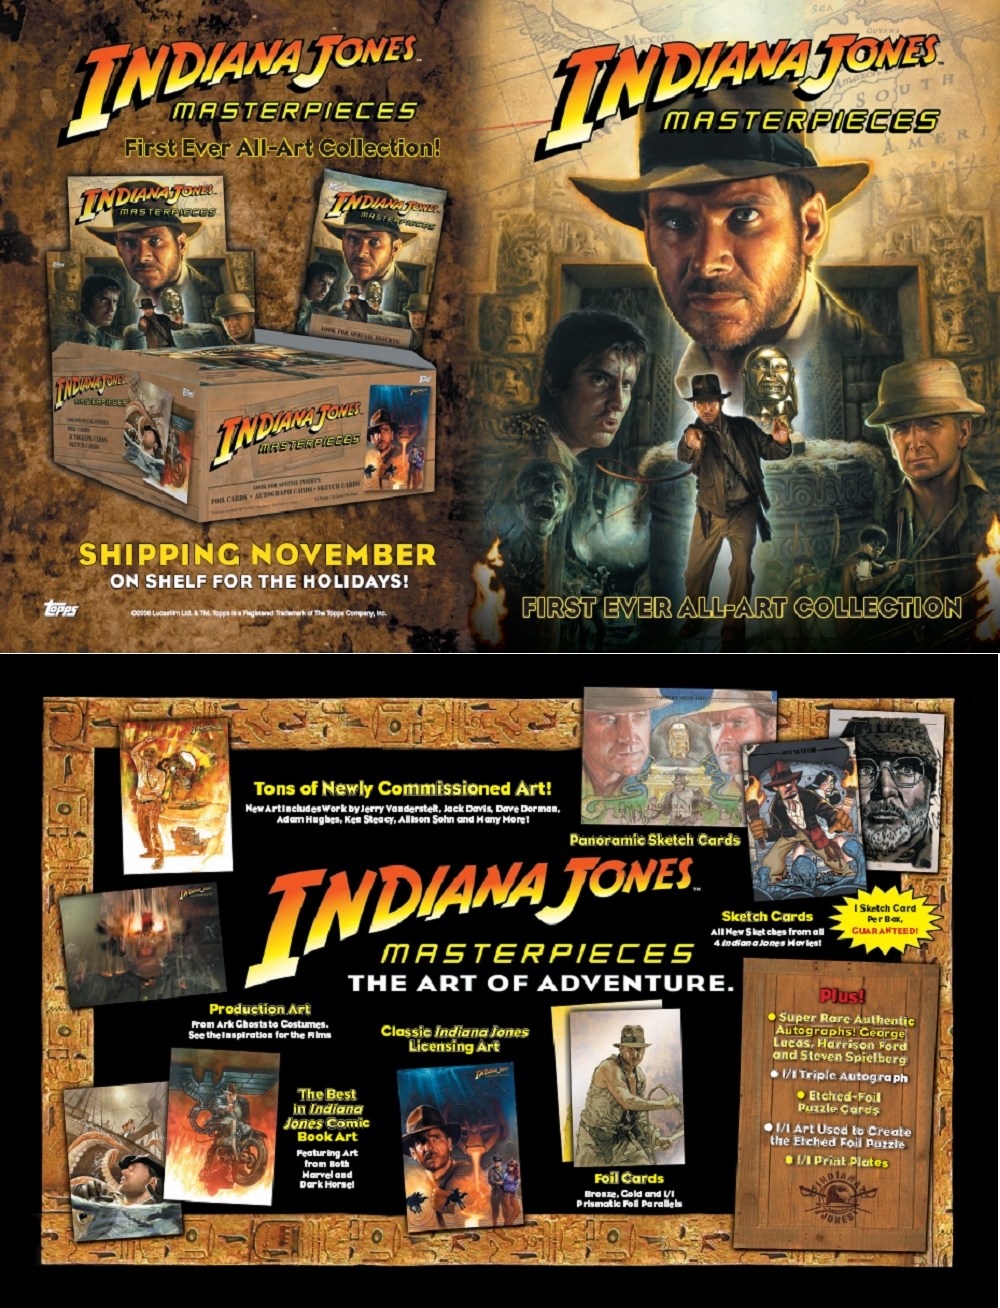 2008 Topps Indiana Jones Masterpieces Card #65 Video Games The Infernal Machine